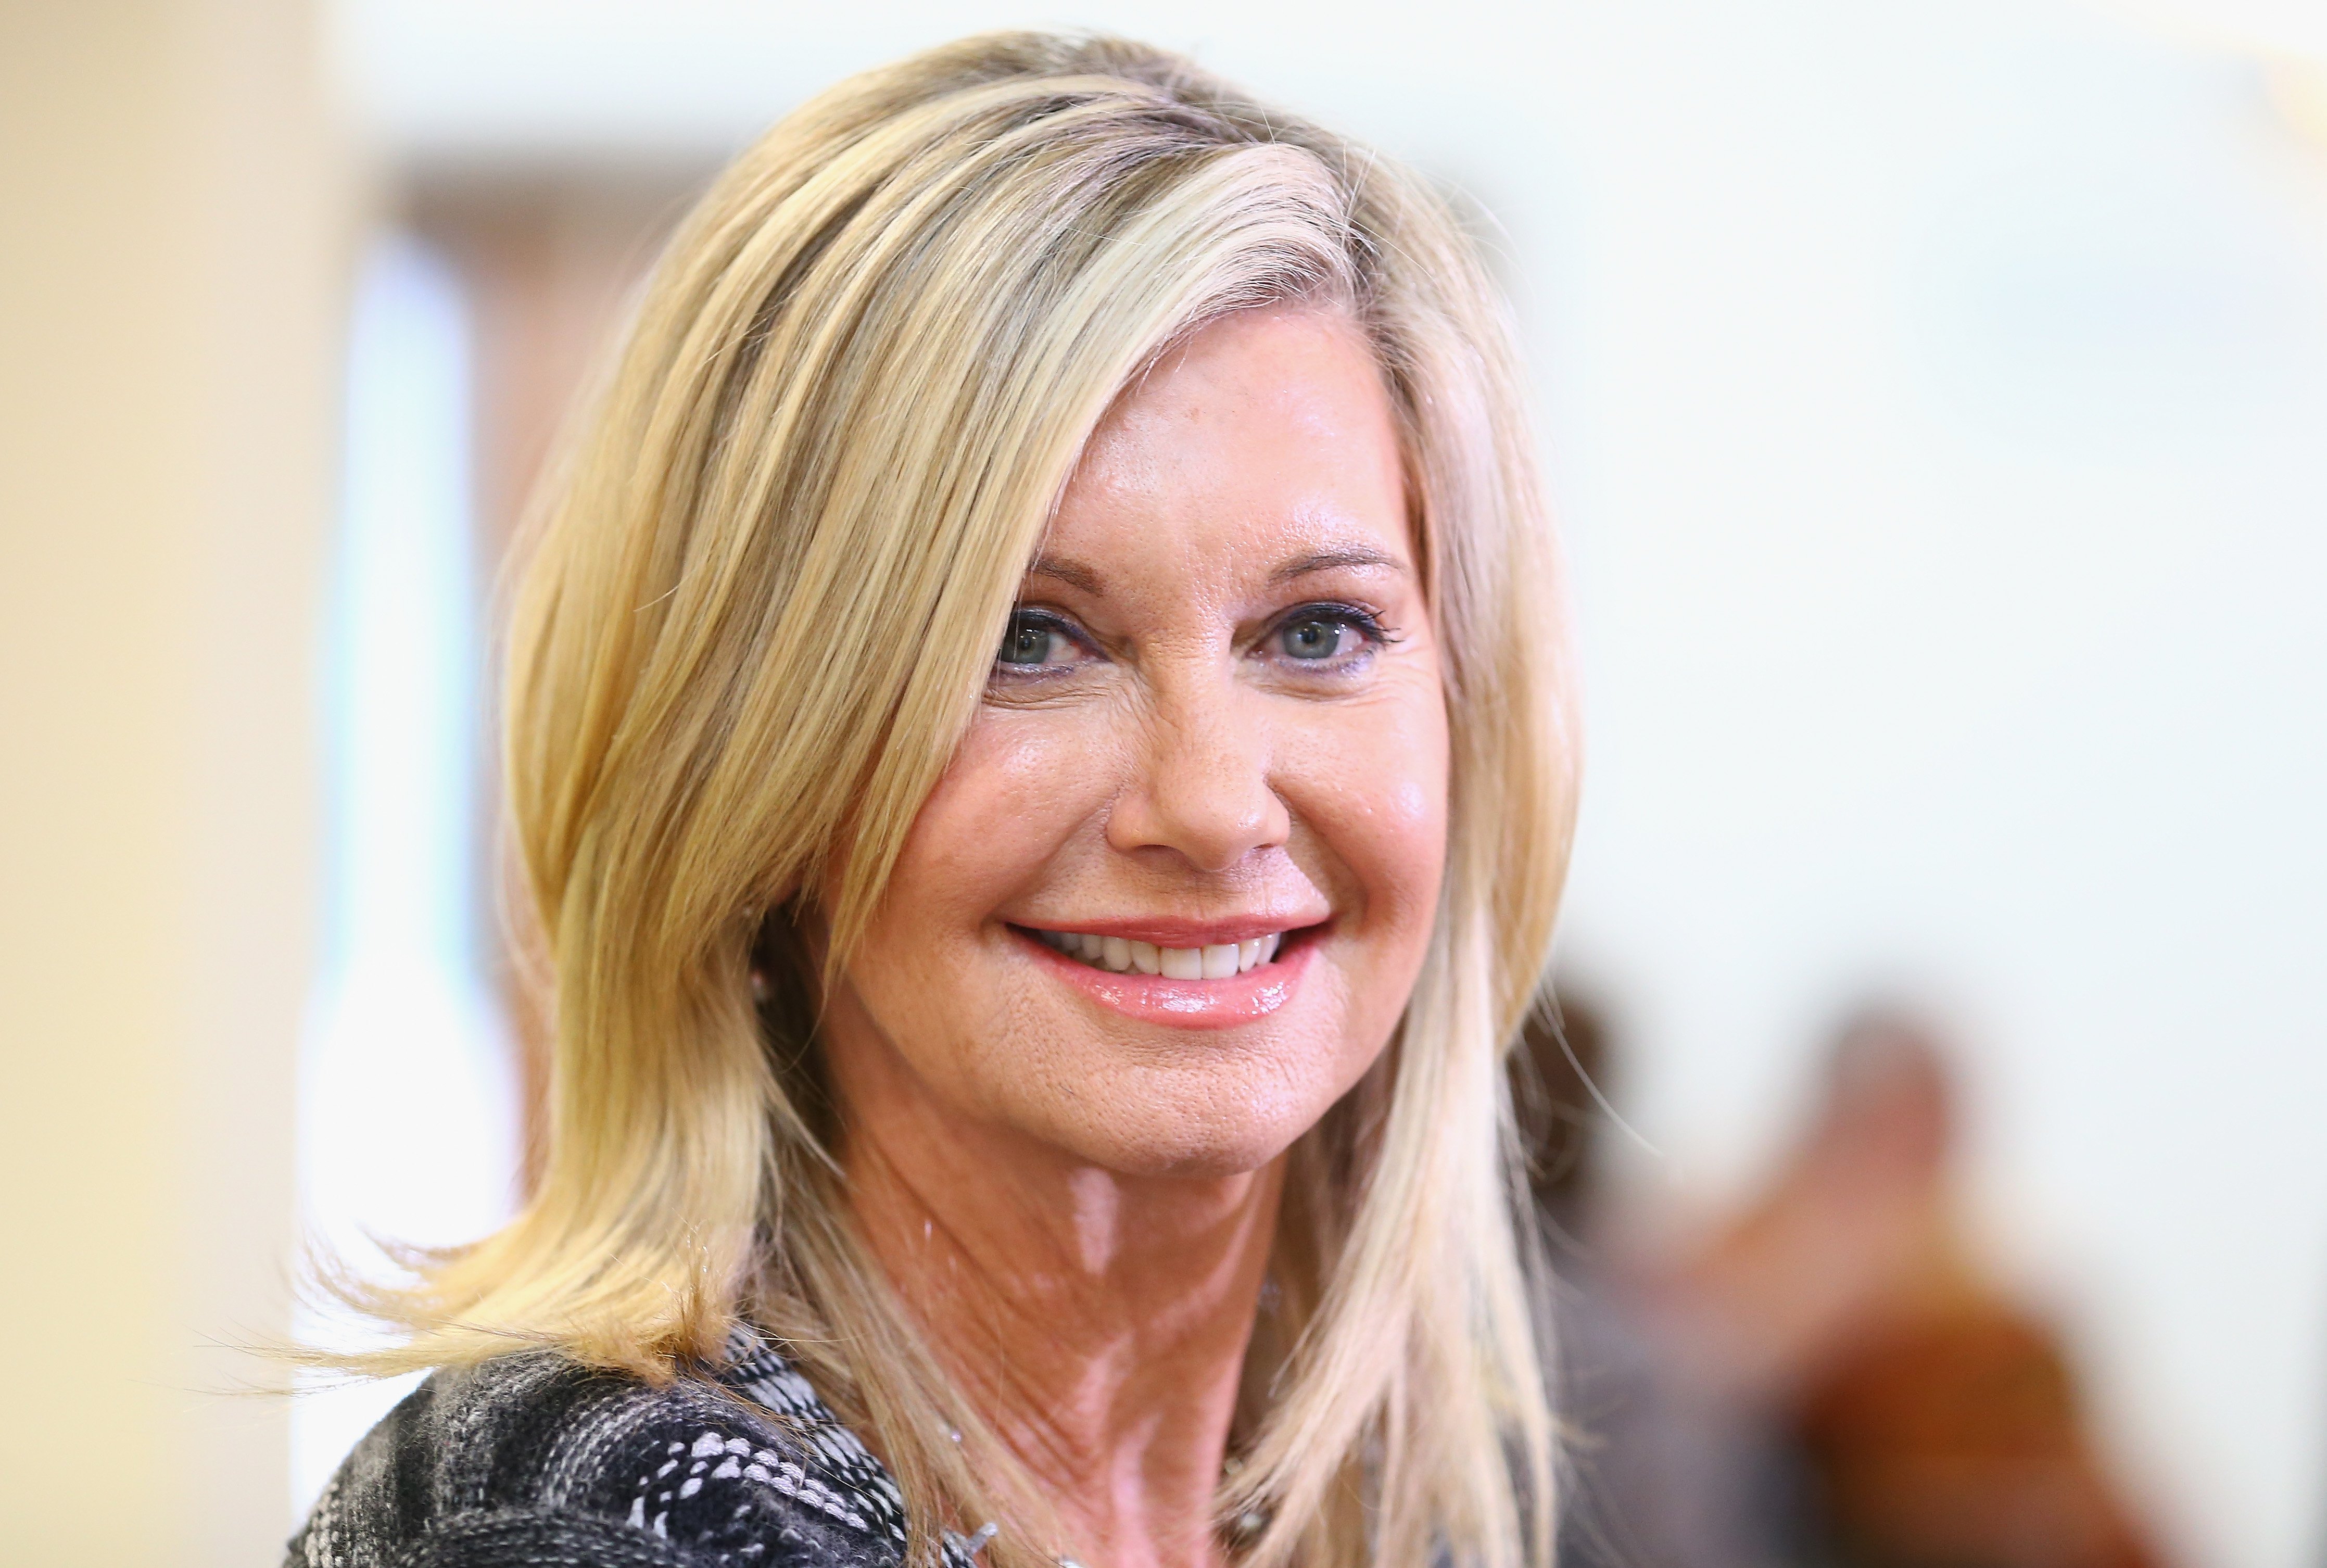 Olivia Newton-John at the opening of the Olivia Newton-John Cancer & Wellness Centre on September 20, 2013 | Photo: GettyImages